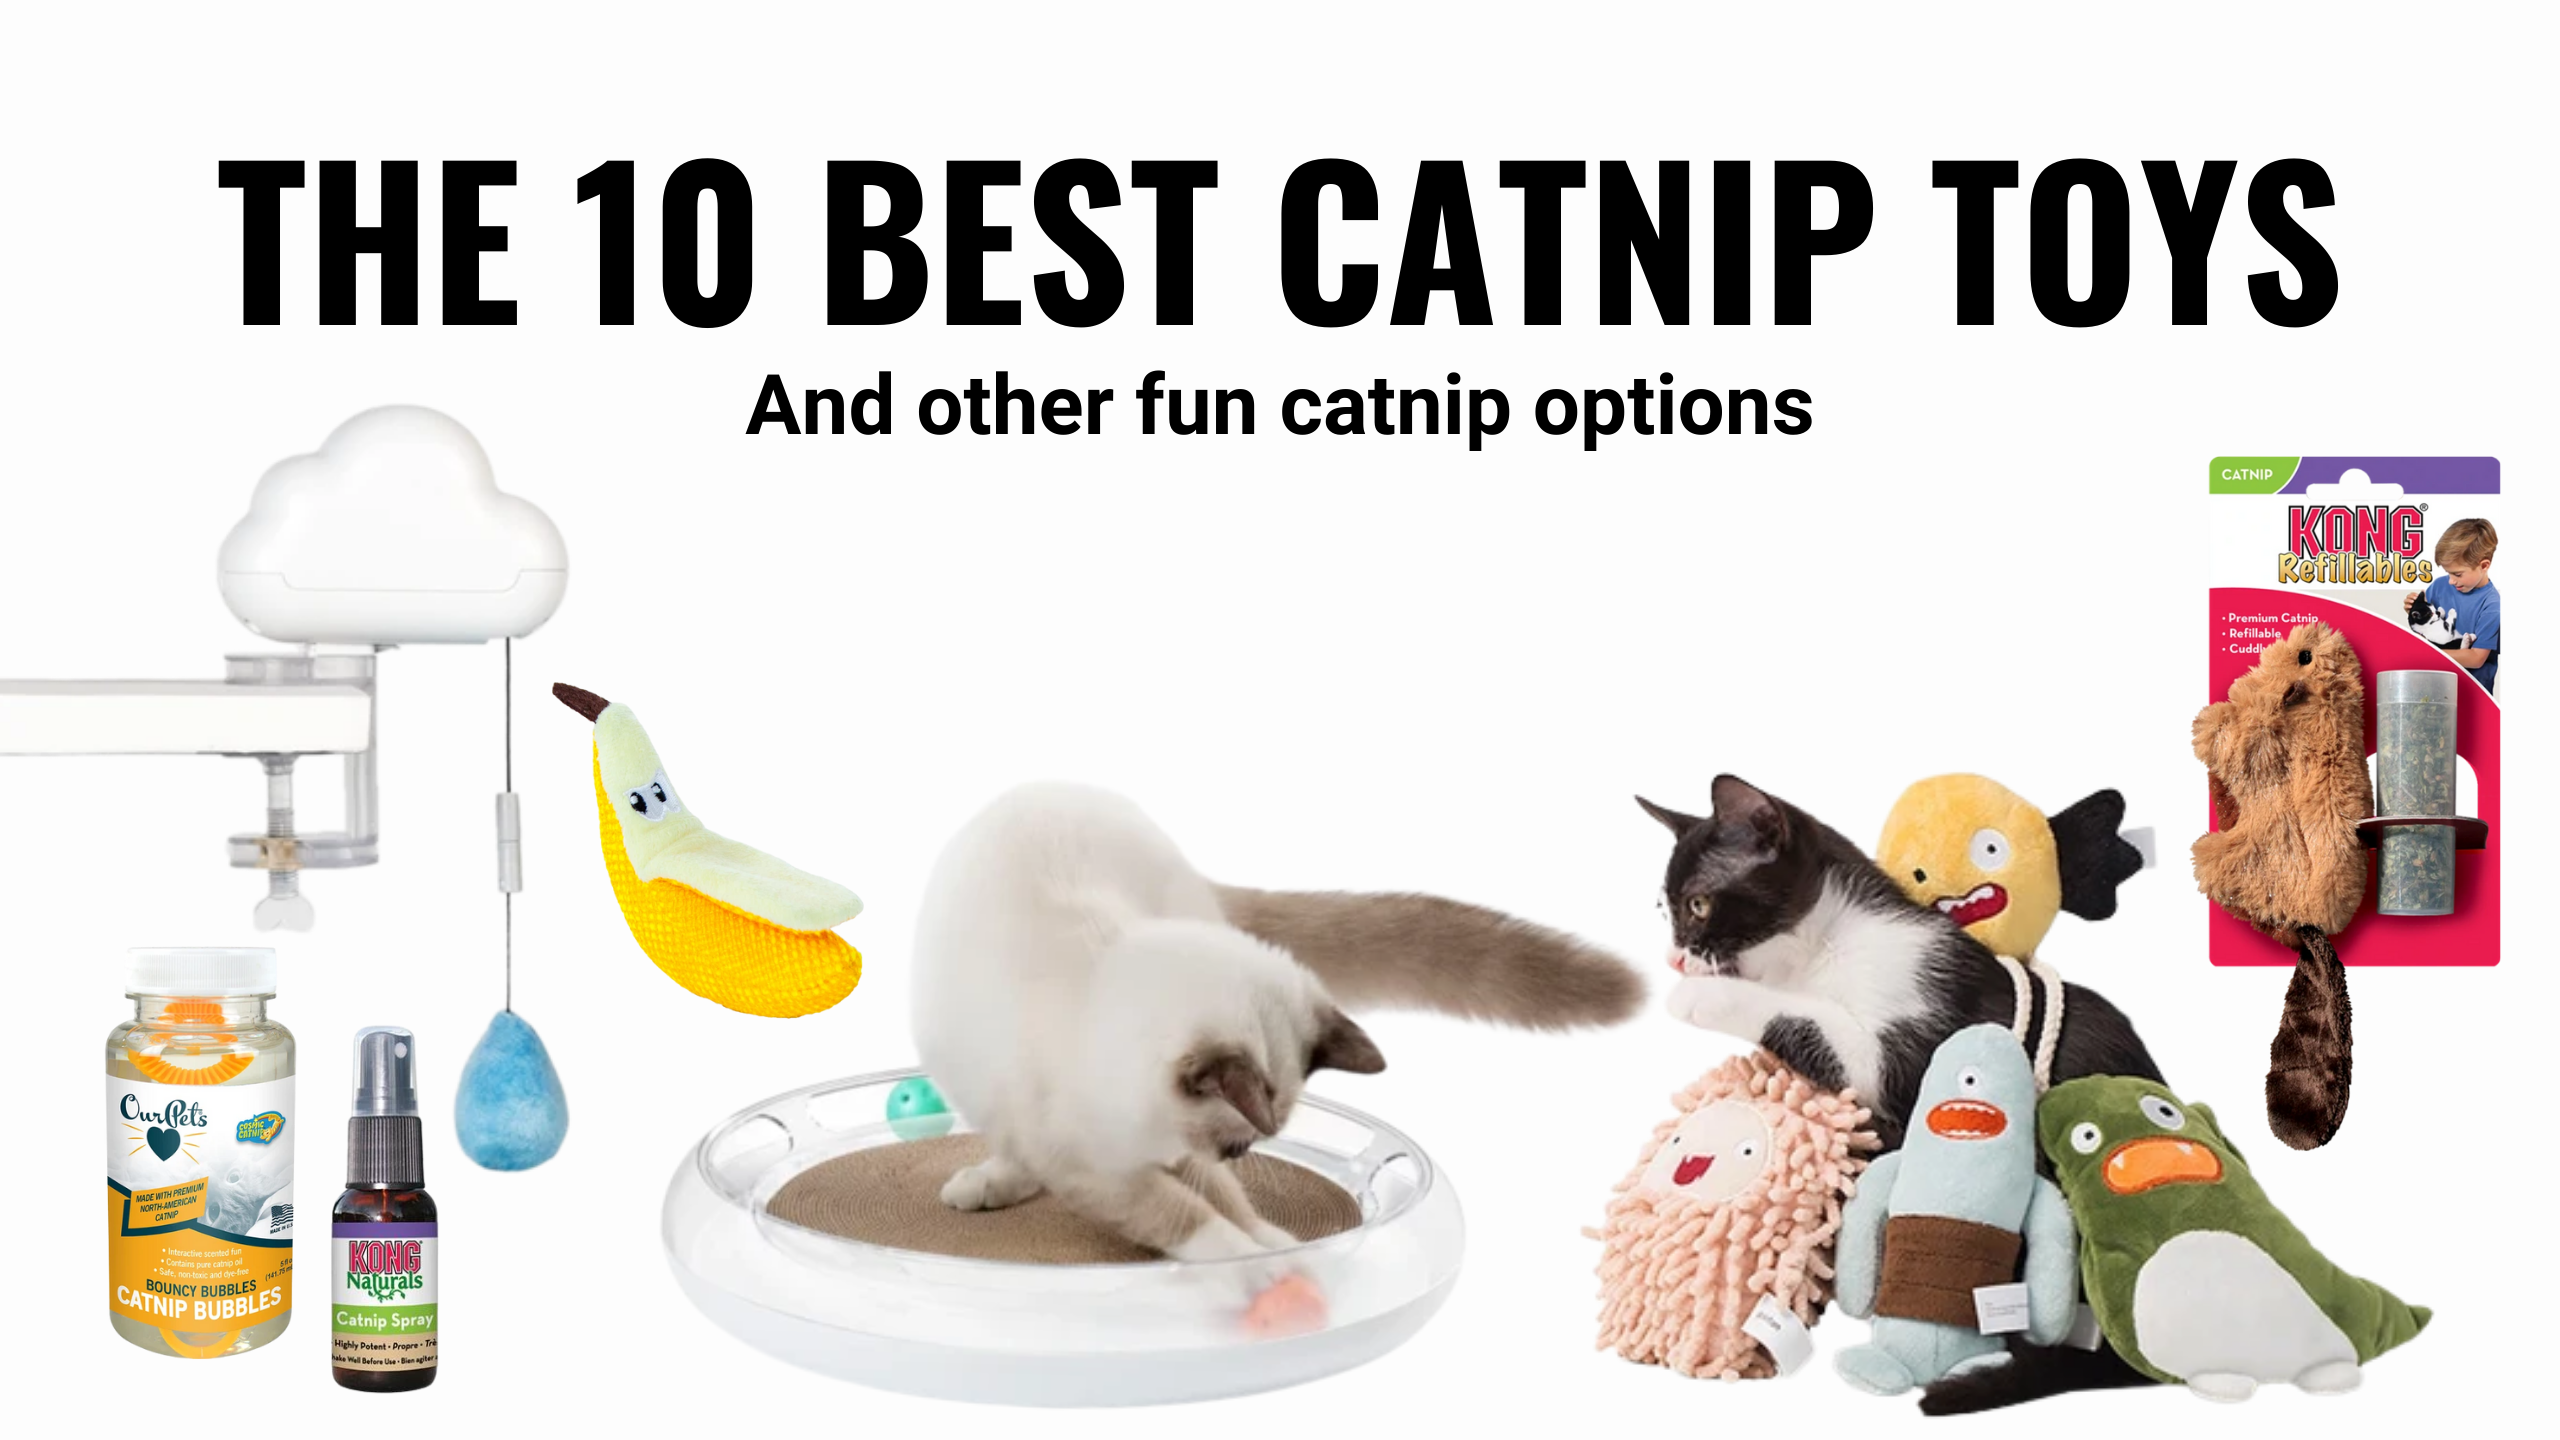 The 10 Best Catnip Toys (And Other Options)